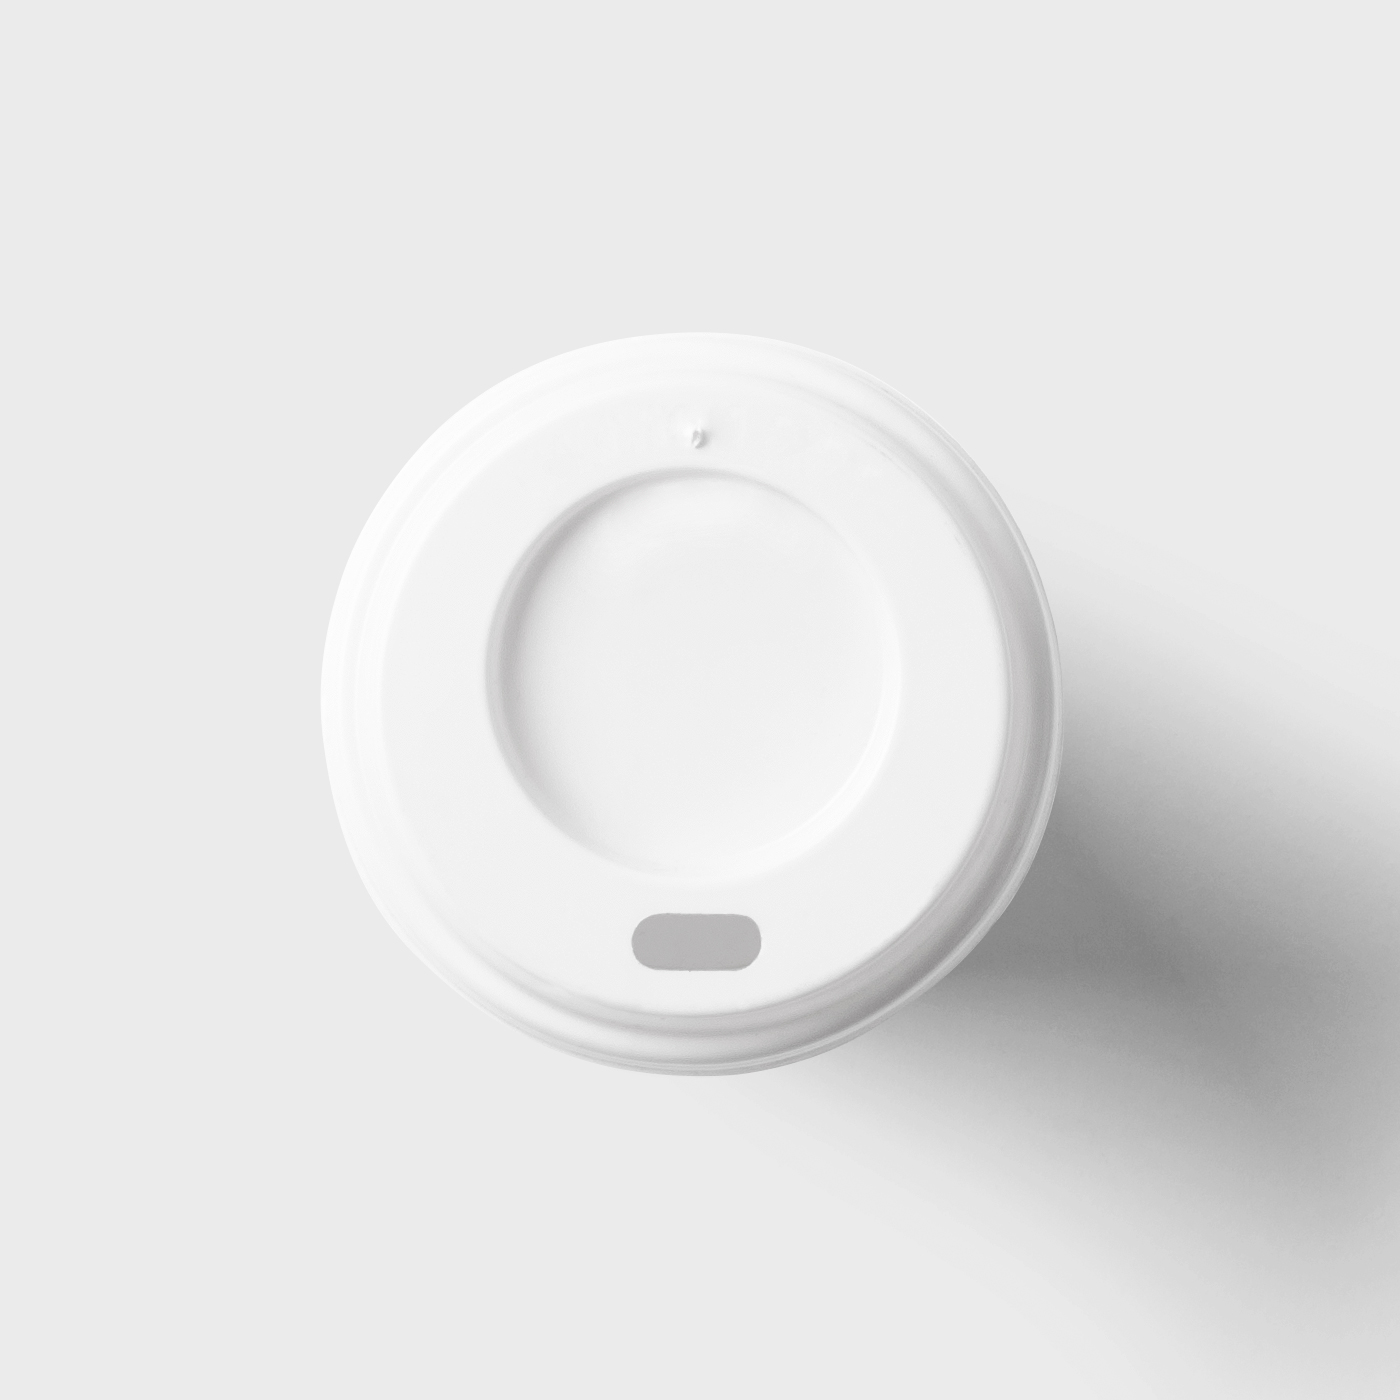 Top View of a Coffee Cup Lid Cover Mockup FREE PSD